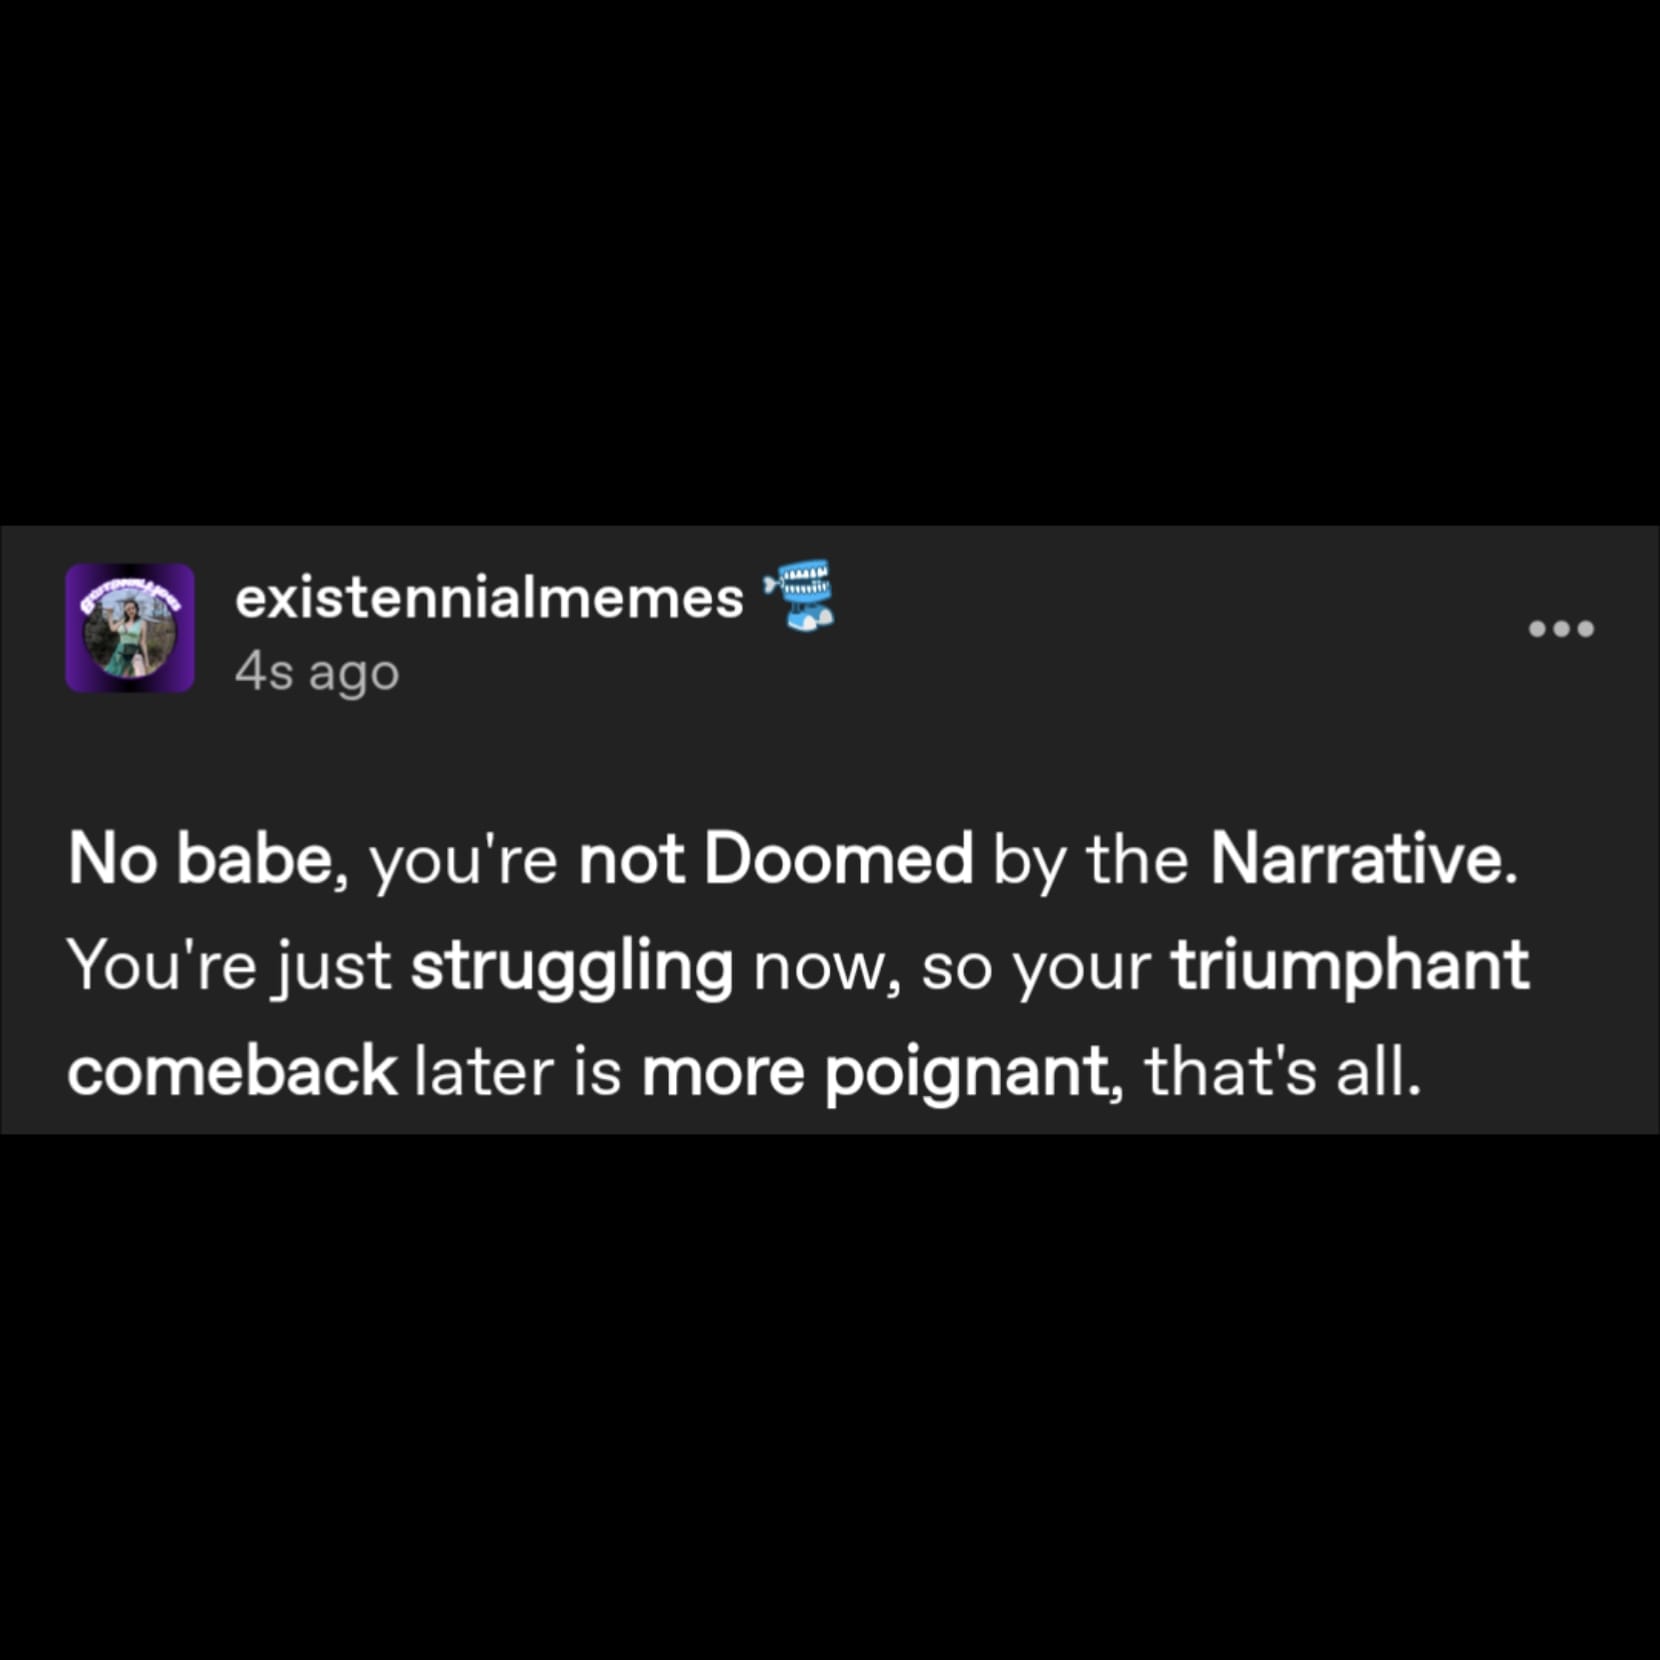 a tumblr post by user existennialmemes that reads No babe, you're not Doomed by the Narrative. You're just struggling now, so your triumphant comeback later is more poignant, that's all.